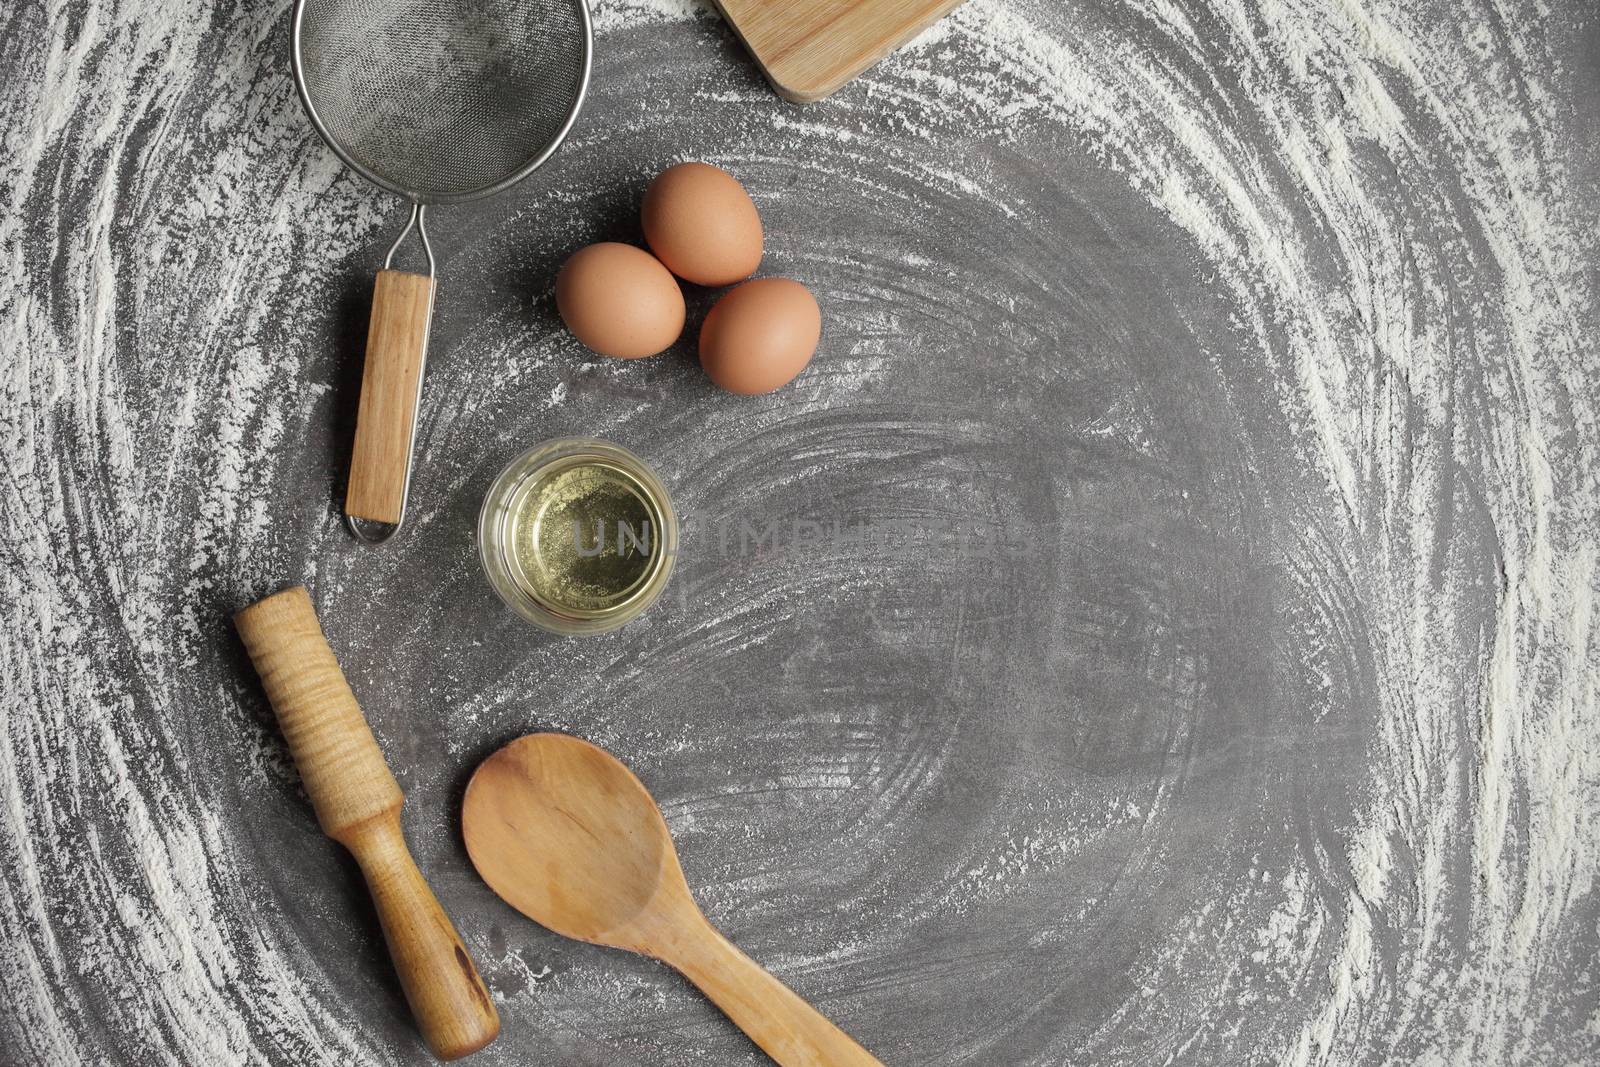 Chicken egg, flour, olive oil, kitchen tool on gray table background. Products for baking bakery products. Cutting board, rolling pin, flour sieve, wooden spoon. For bread or cake